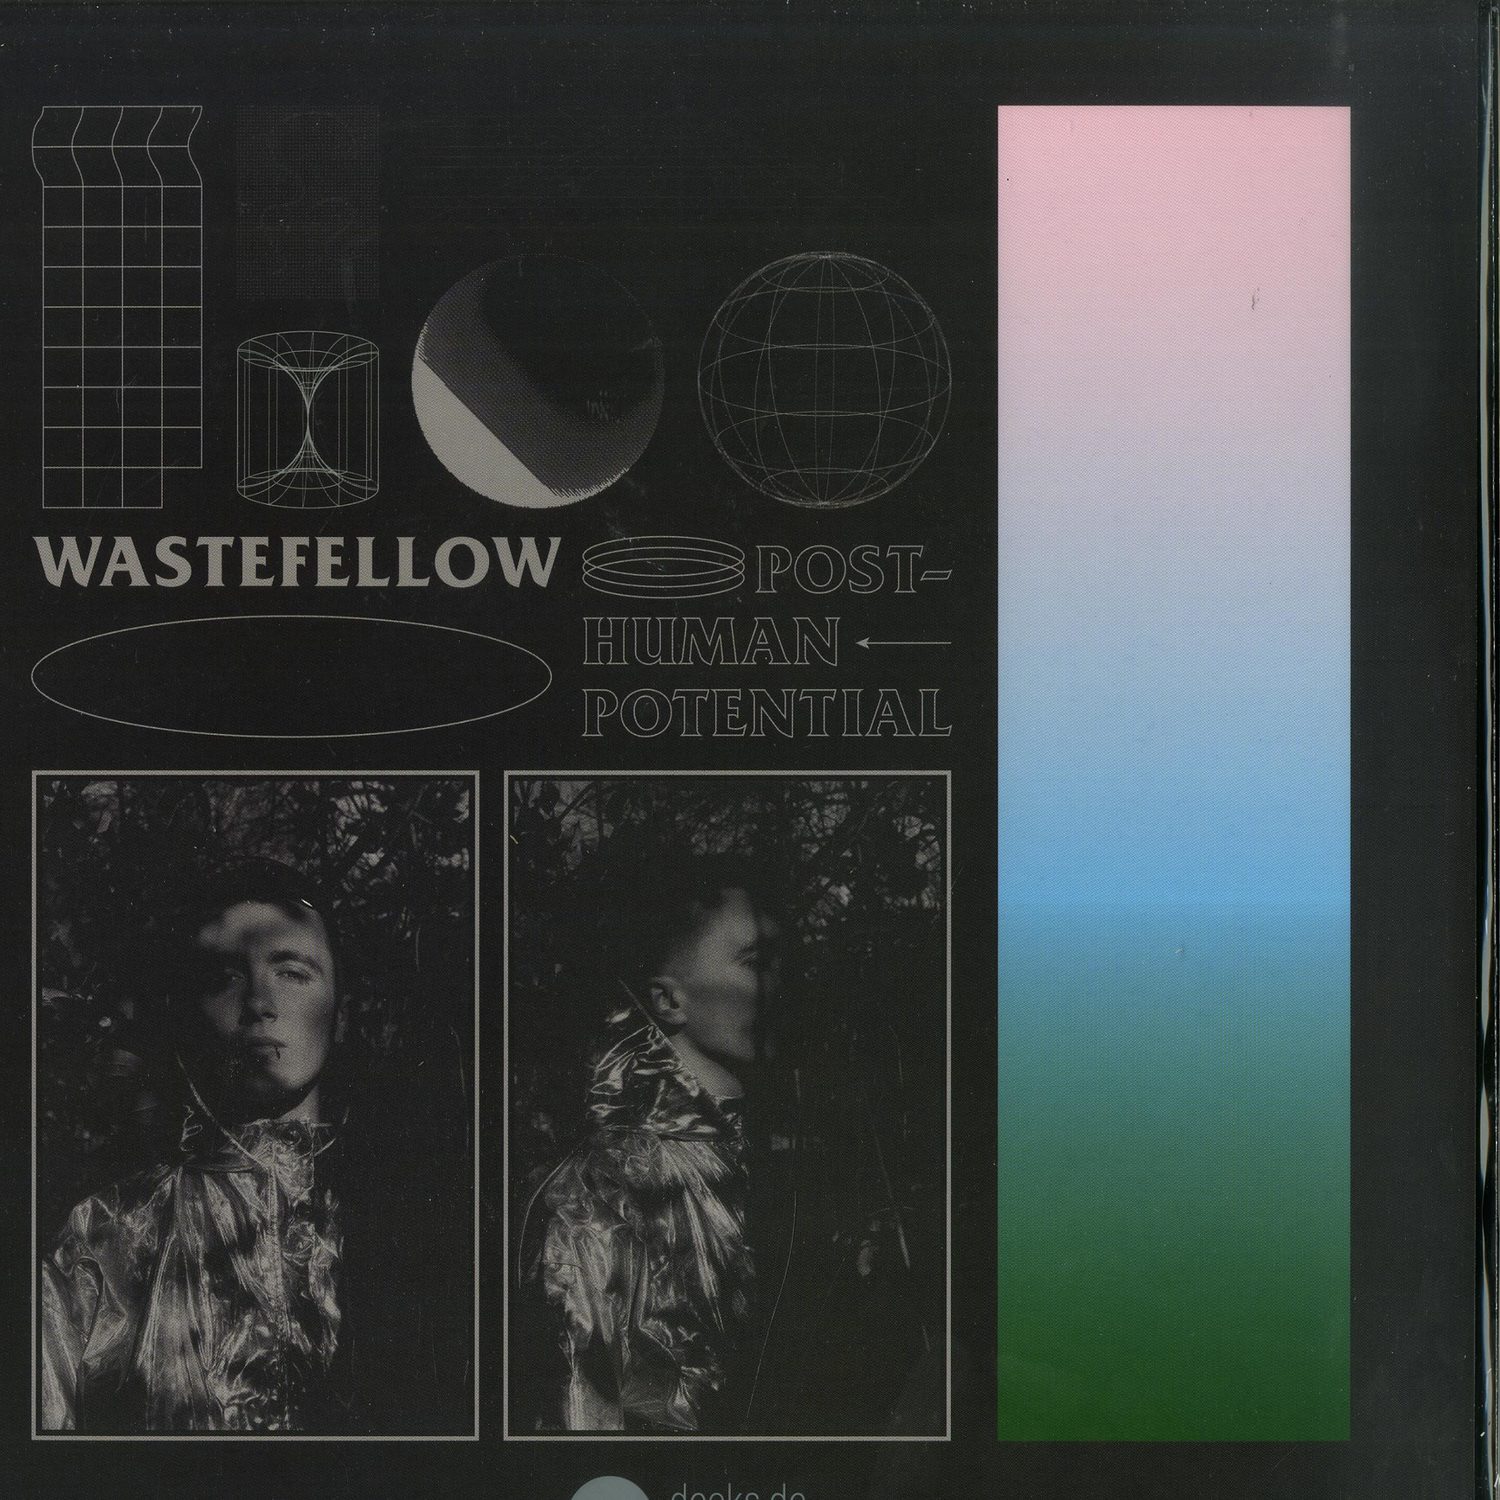 Wastefellow - POST HUMAN POTENTIAL